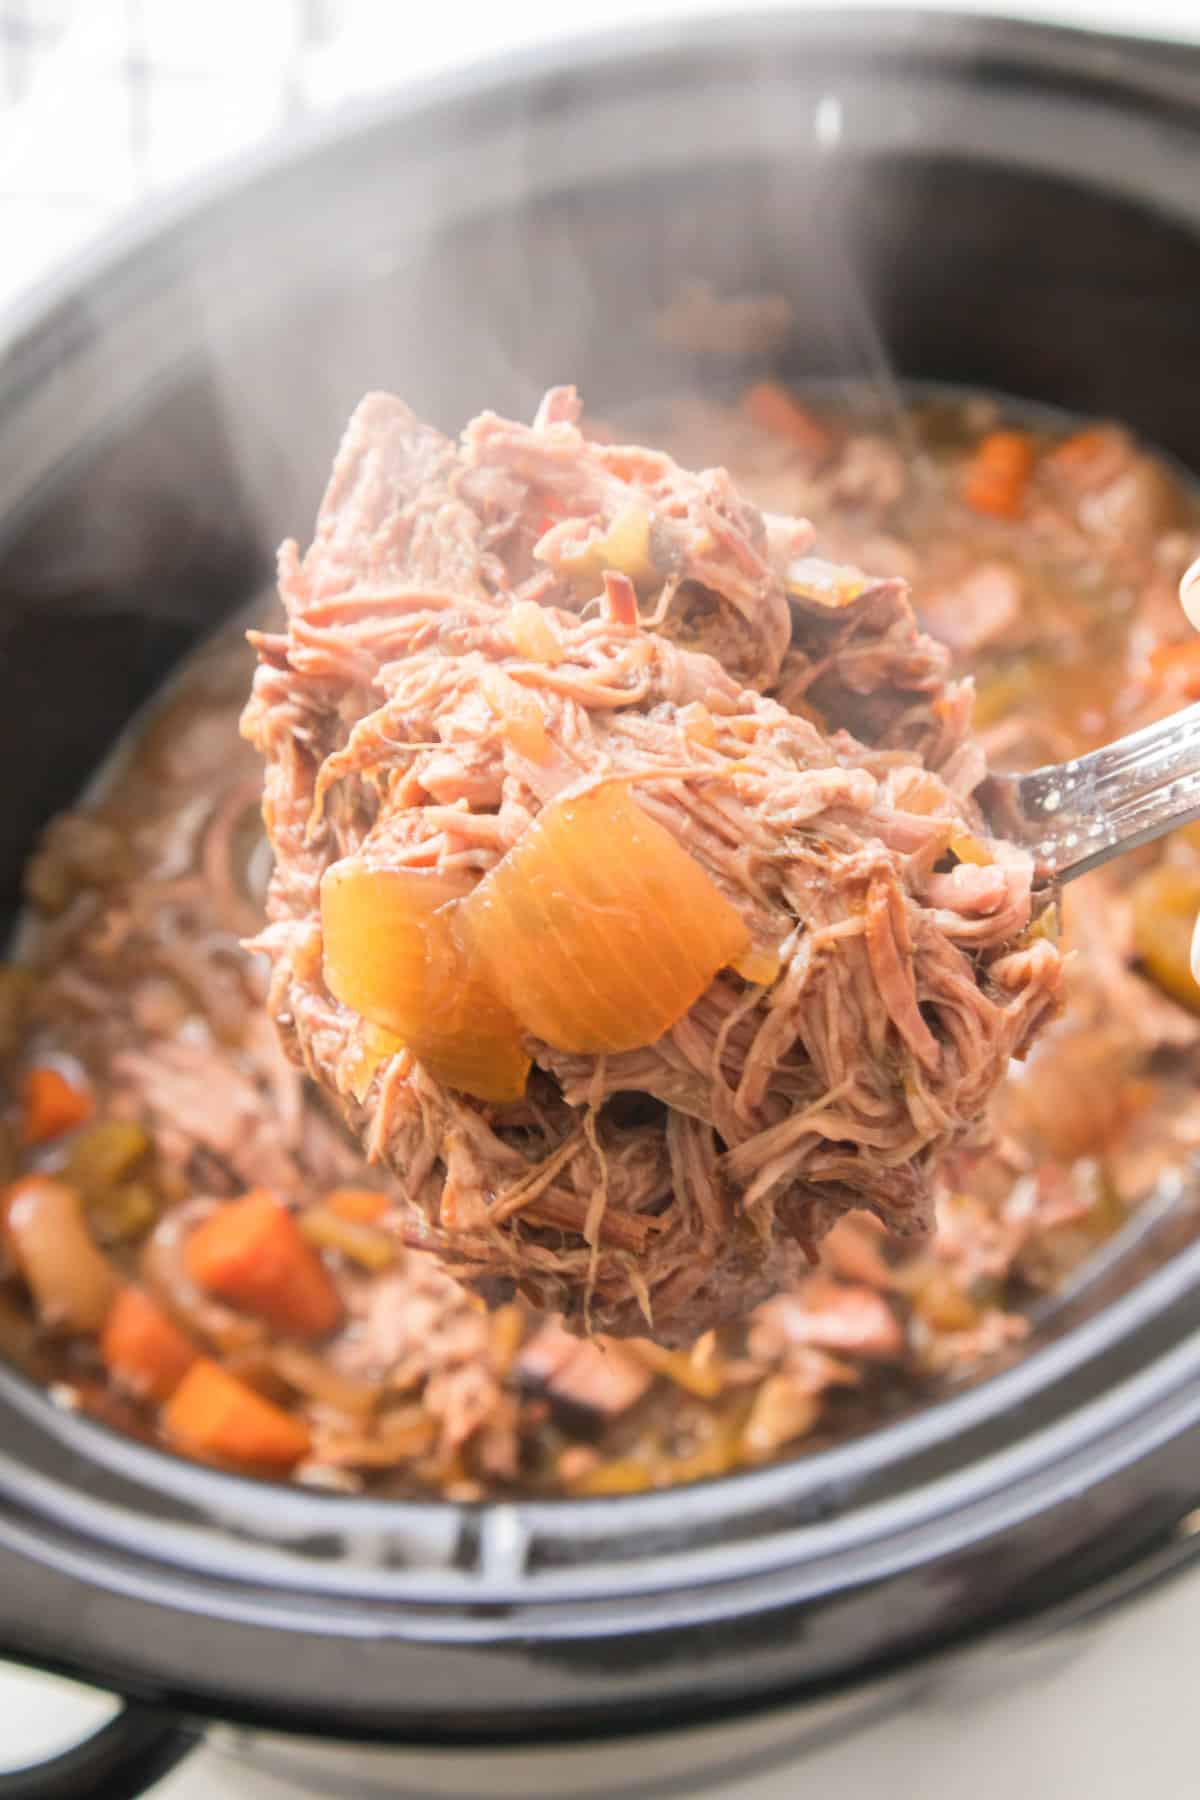 Slow cooker with ready to serve pot roast stew and carrots.